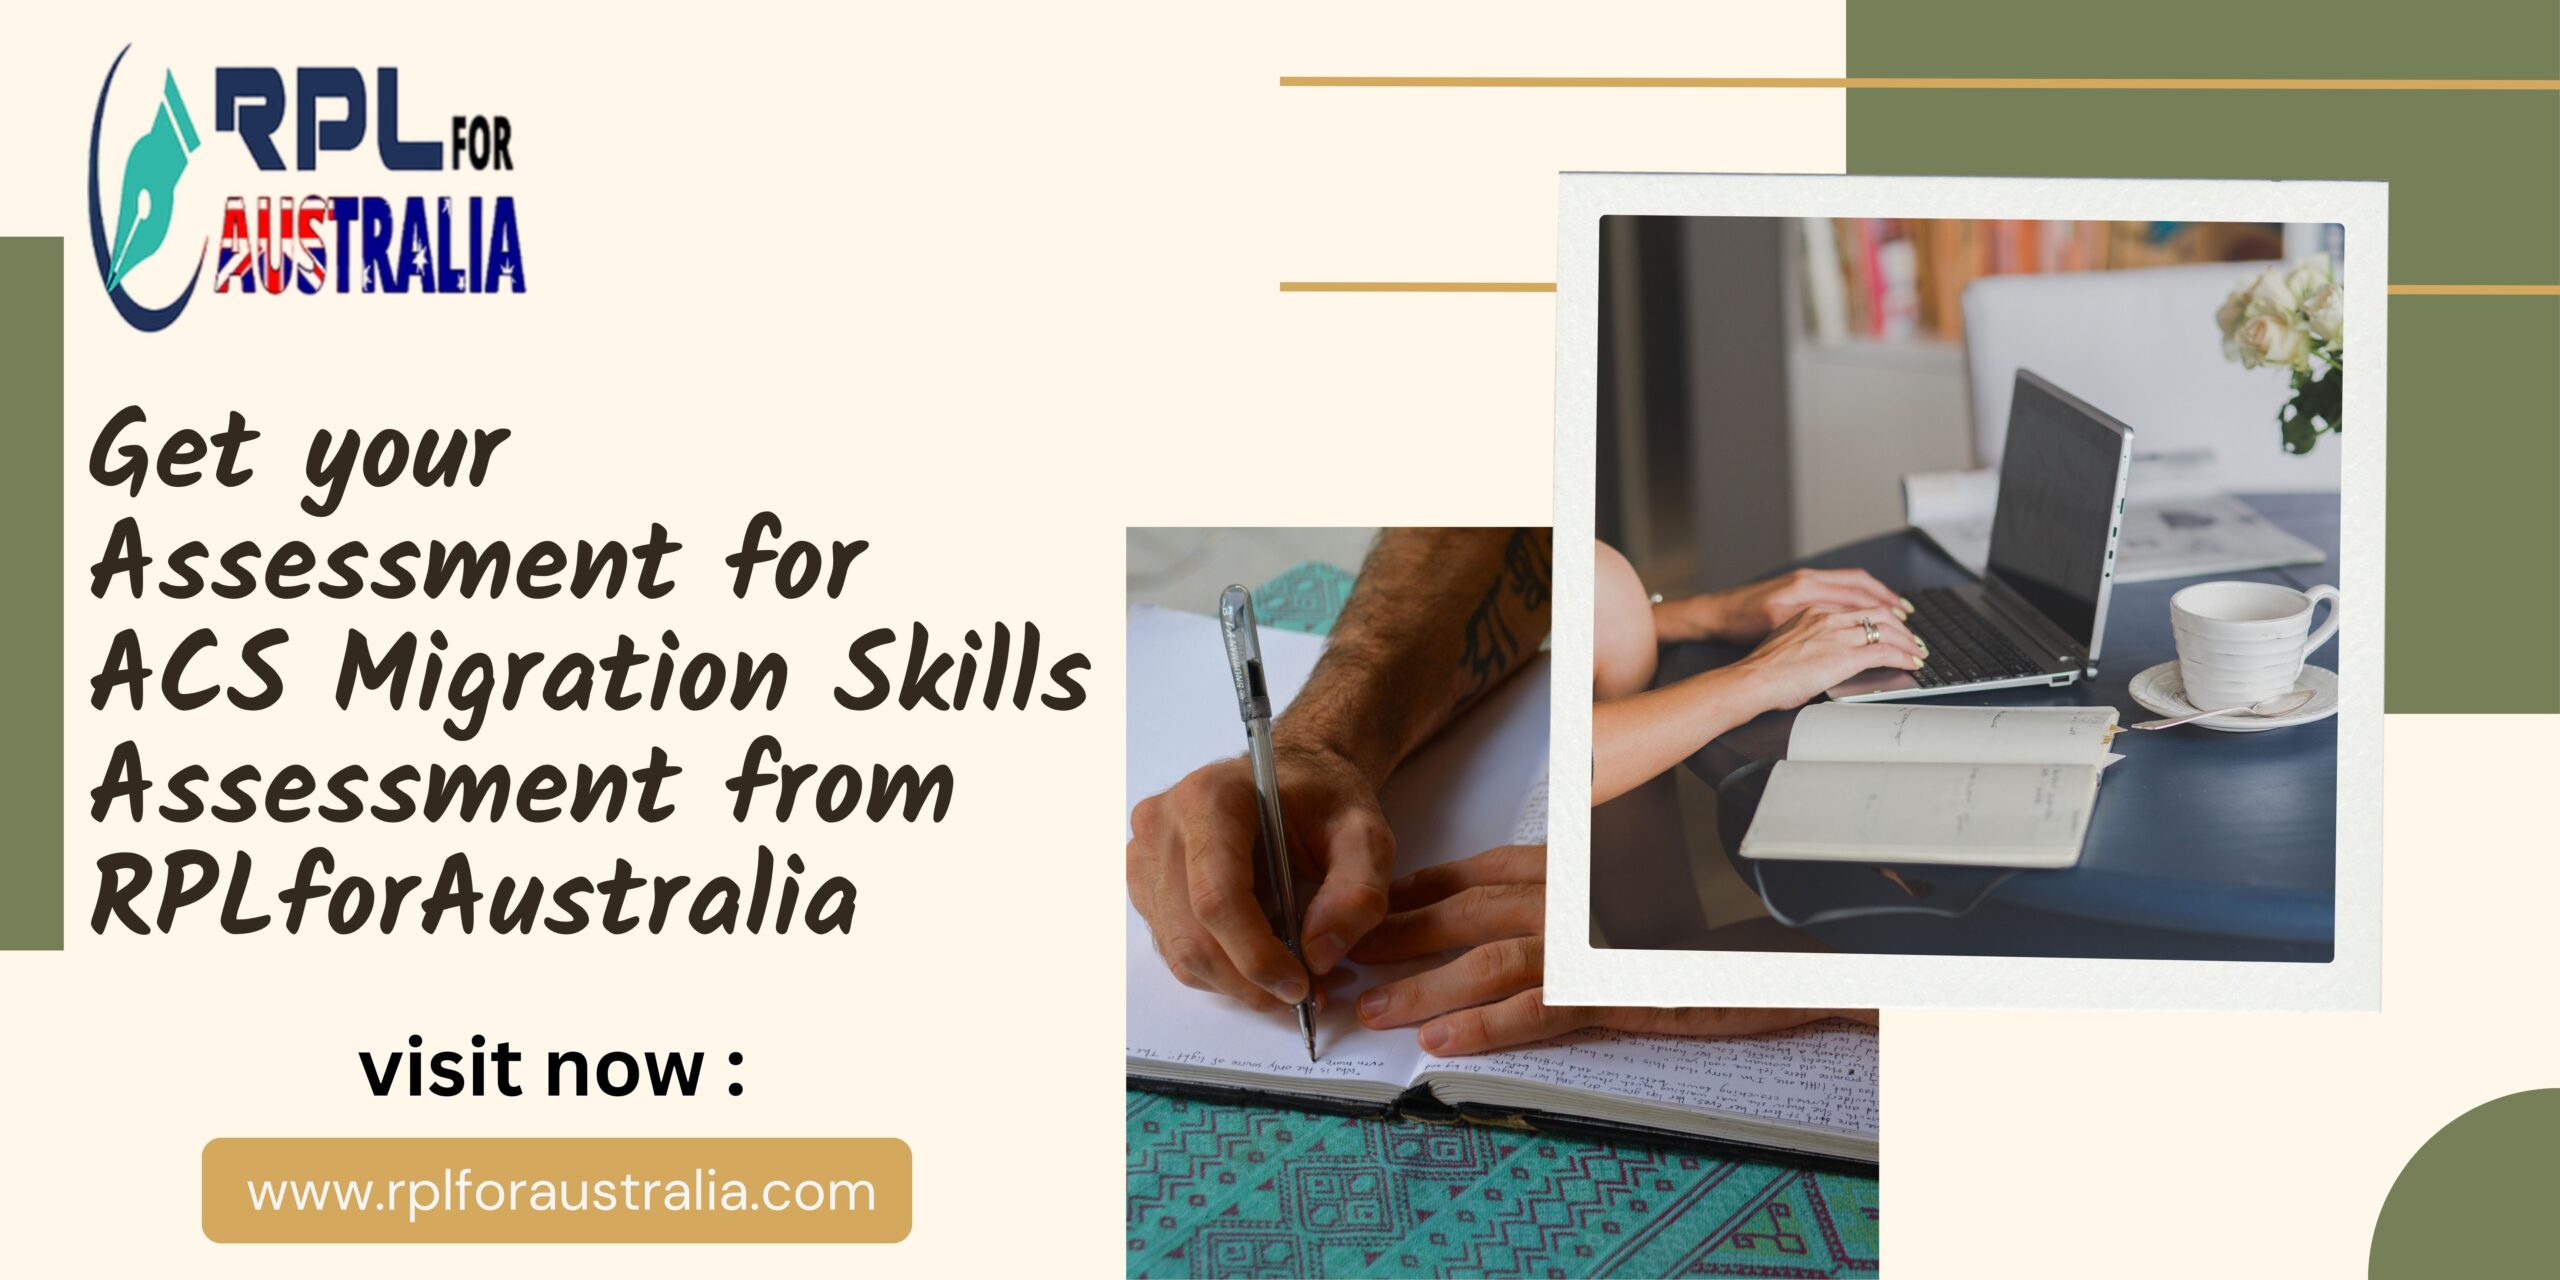 Get your Assessment for ACS Migration Skills Assessment from RPLforAustralia